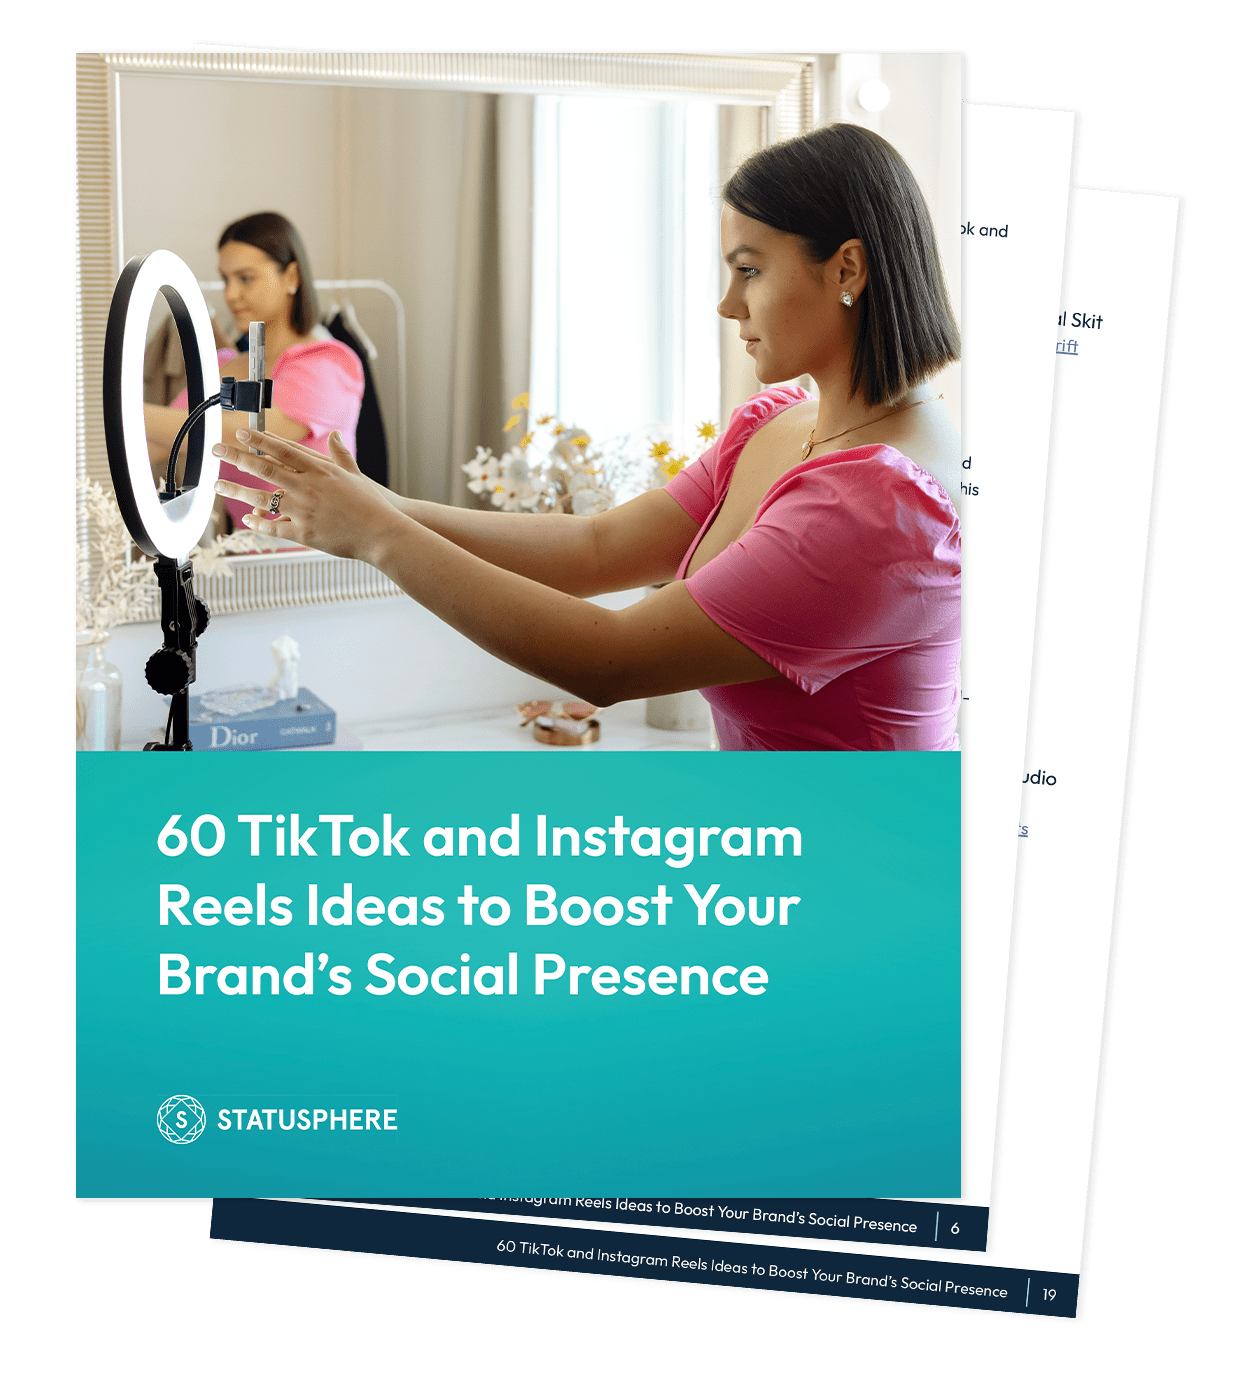 E-Book_60 TikTok and Instagram Reels Ideas to Boost Your Brand_s Social Presence_3DCover